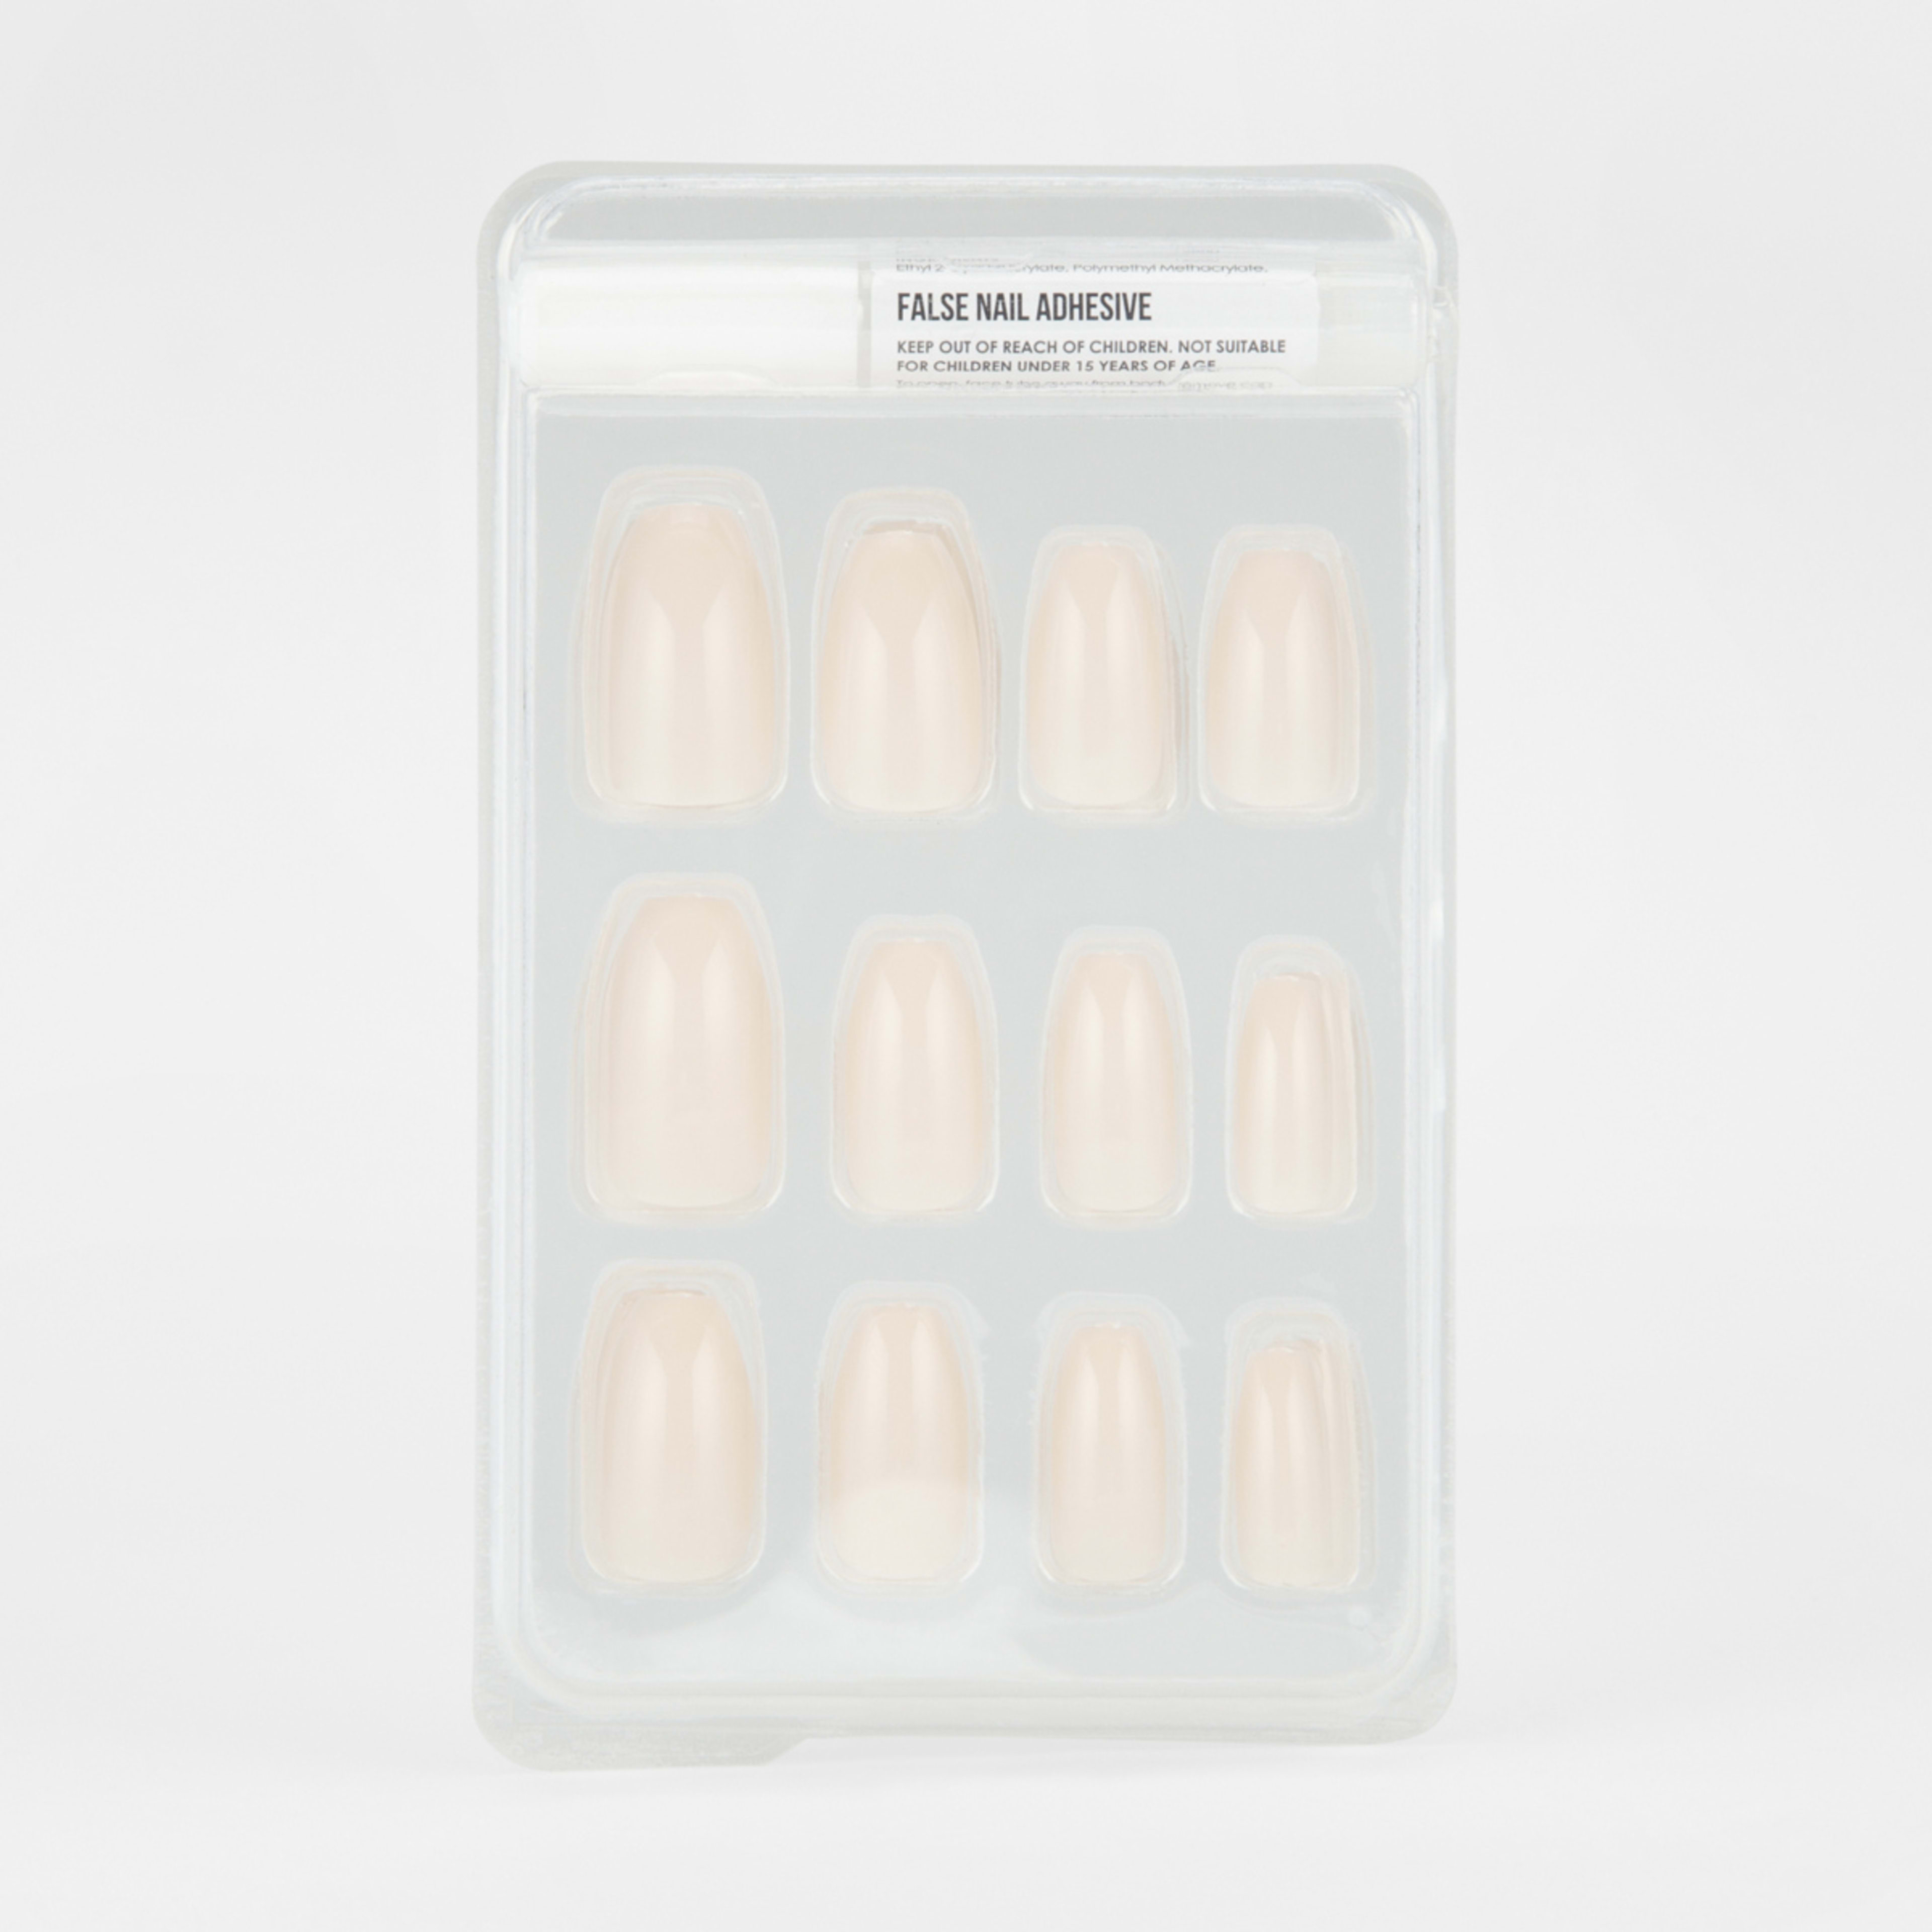 OXX Cosmetics 24 Pack False Nails with Adhesive - Coffin Shape, Milky ...